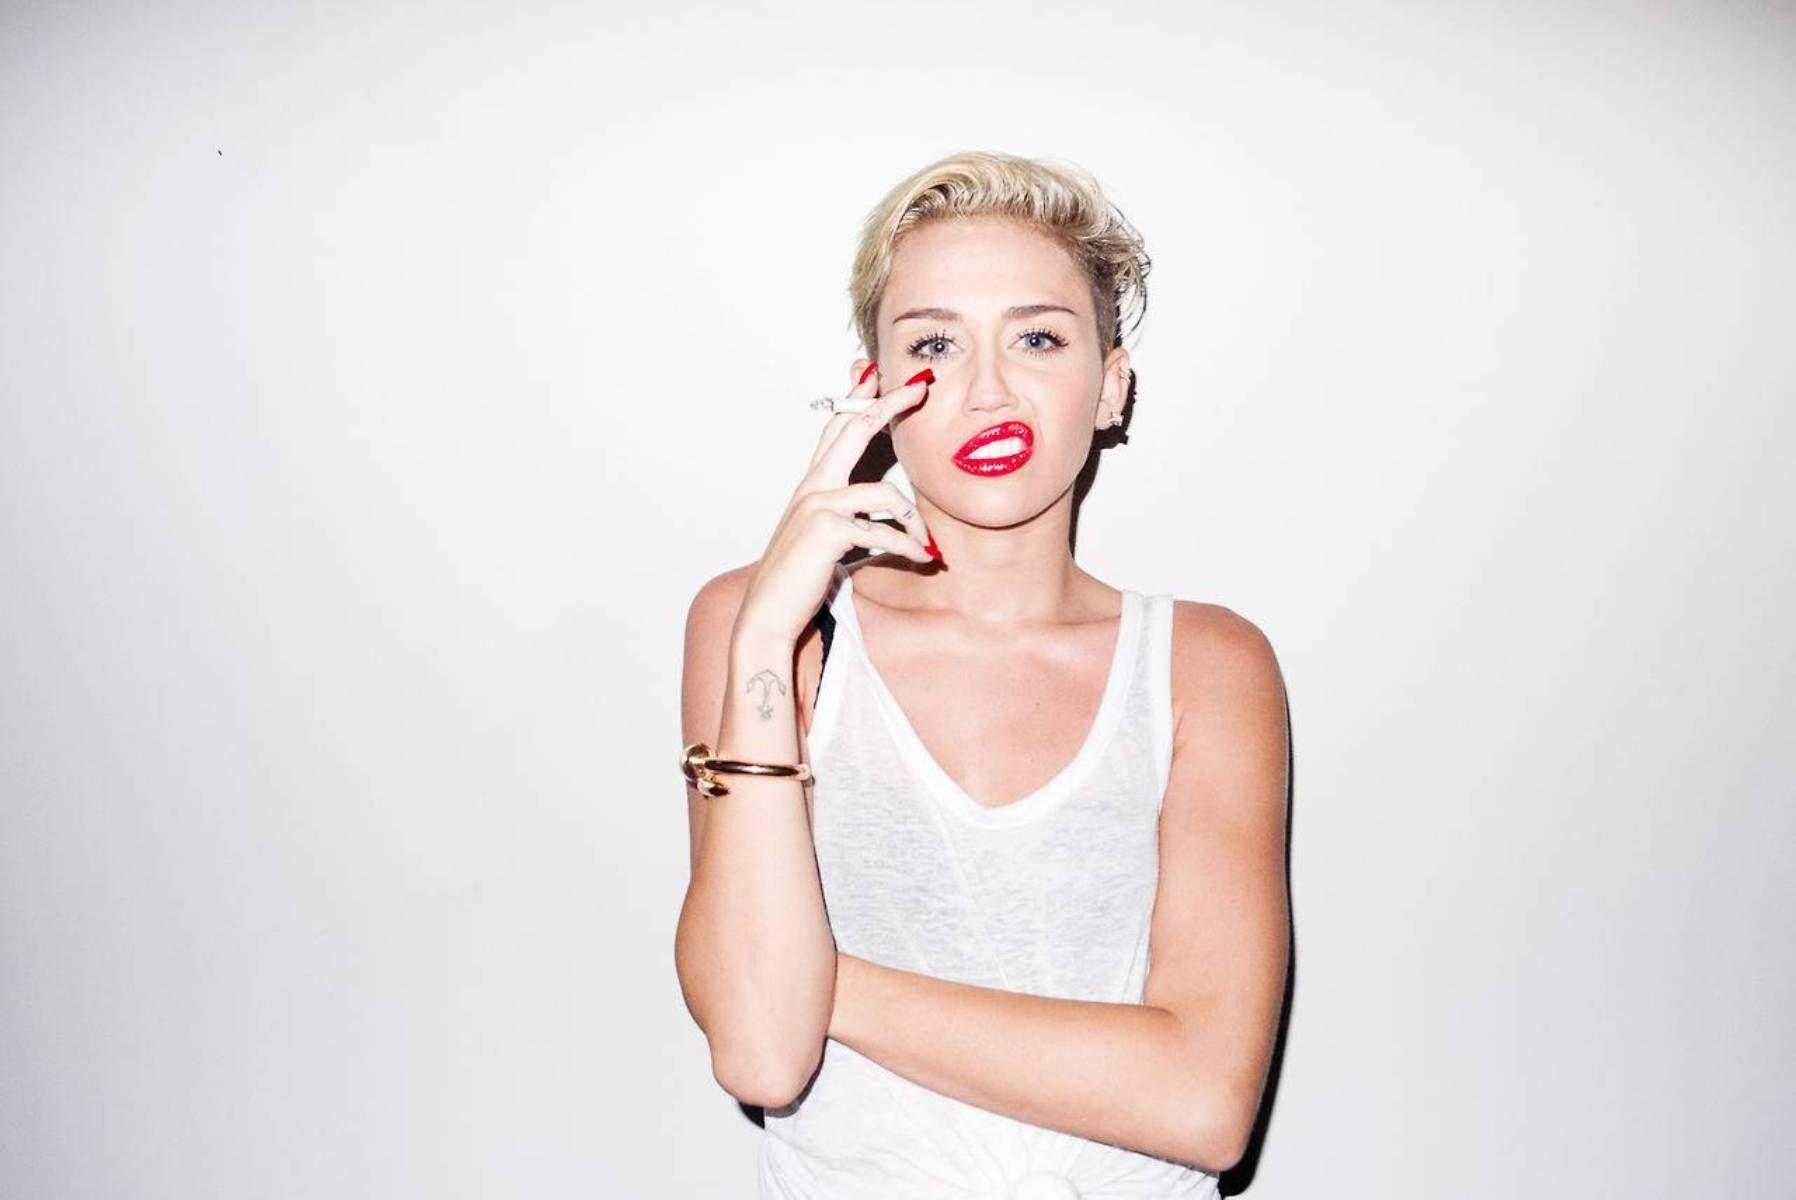 Miley Cyrus Wallpaper, HD Creative Miley Cyrus Picture, Full